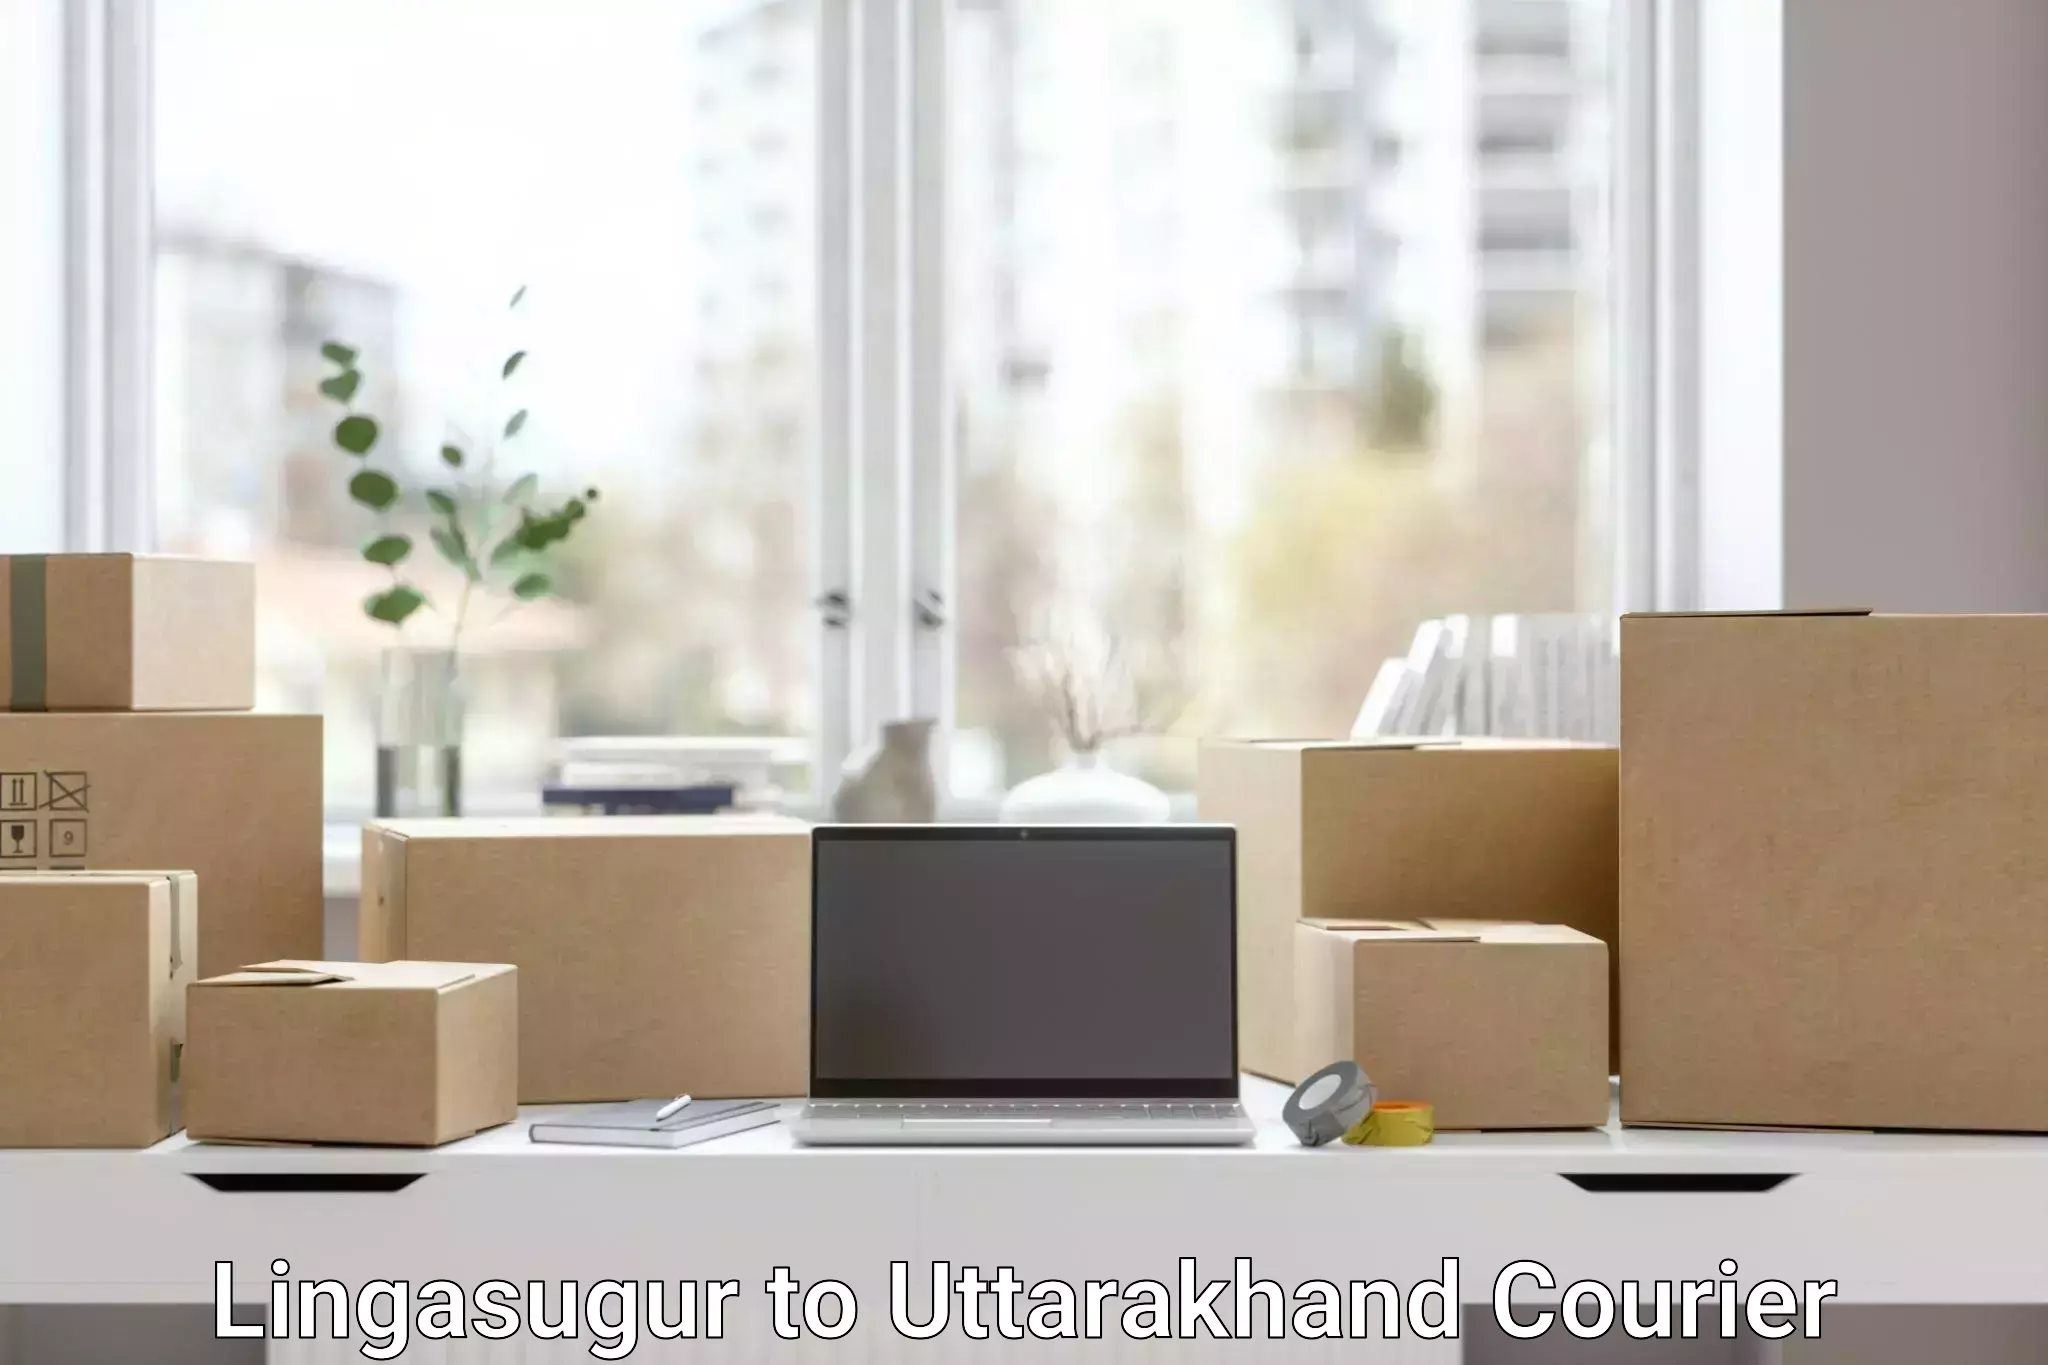 Business courier solutions Lingasugur to Nainital